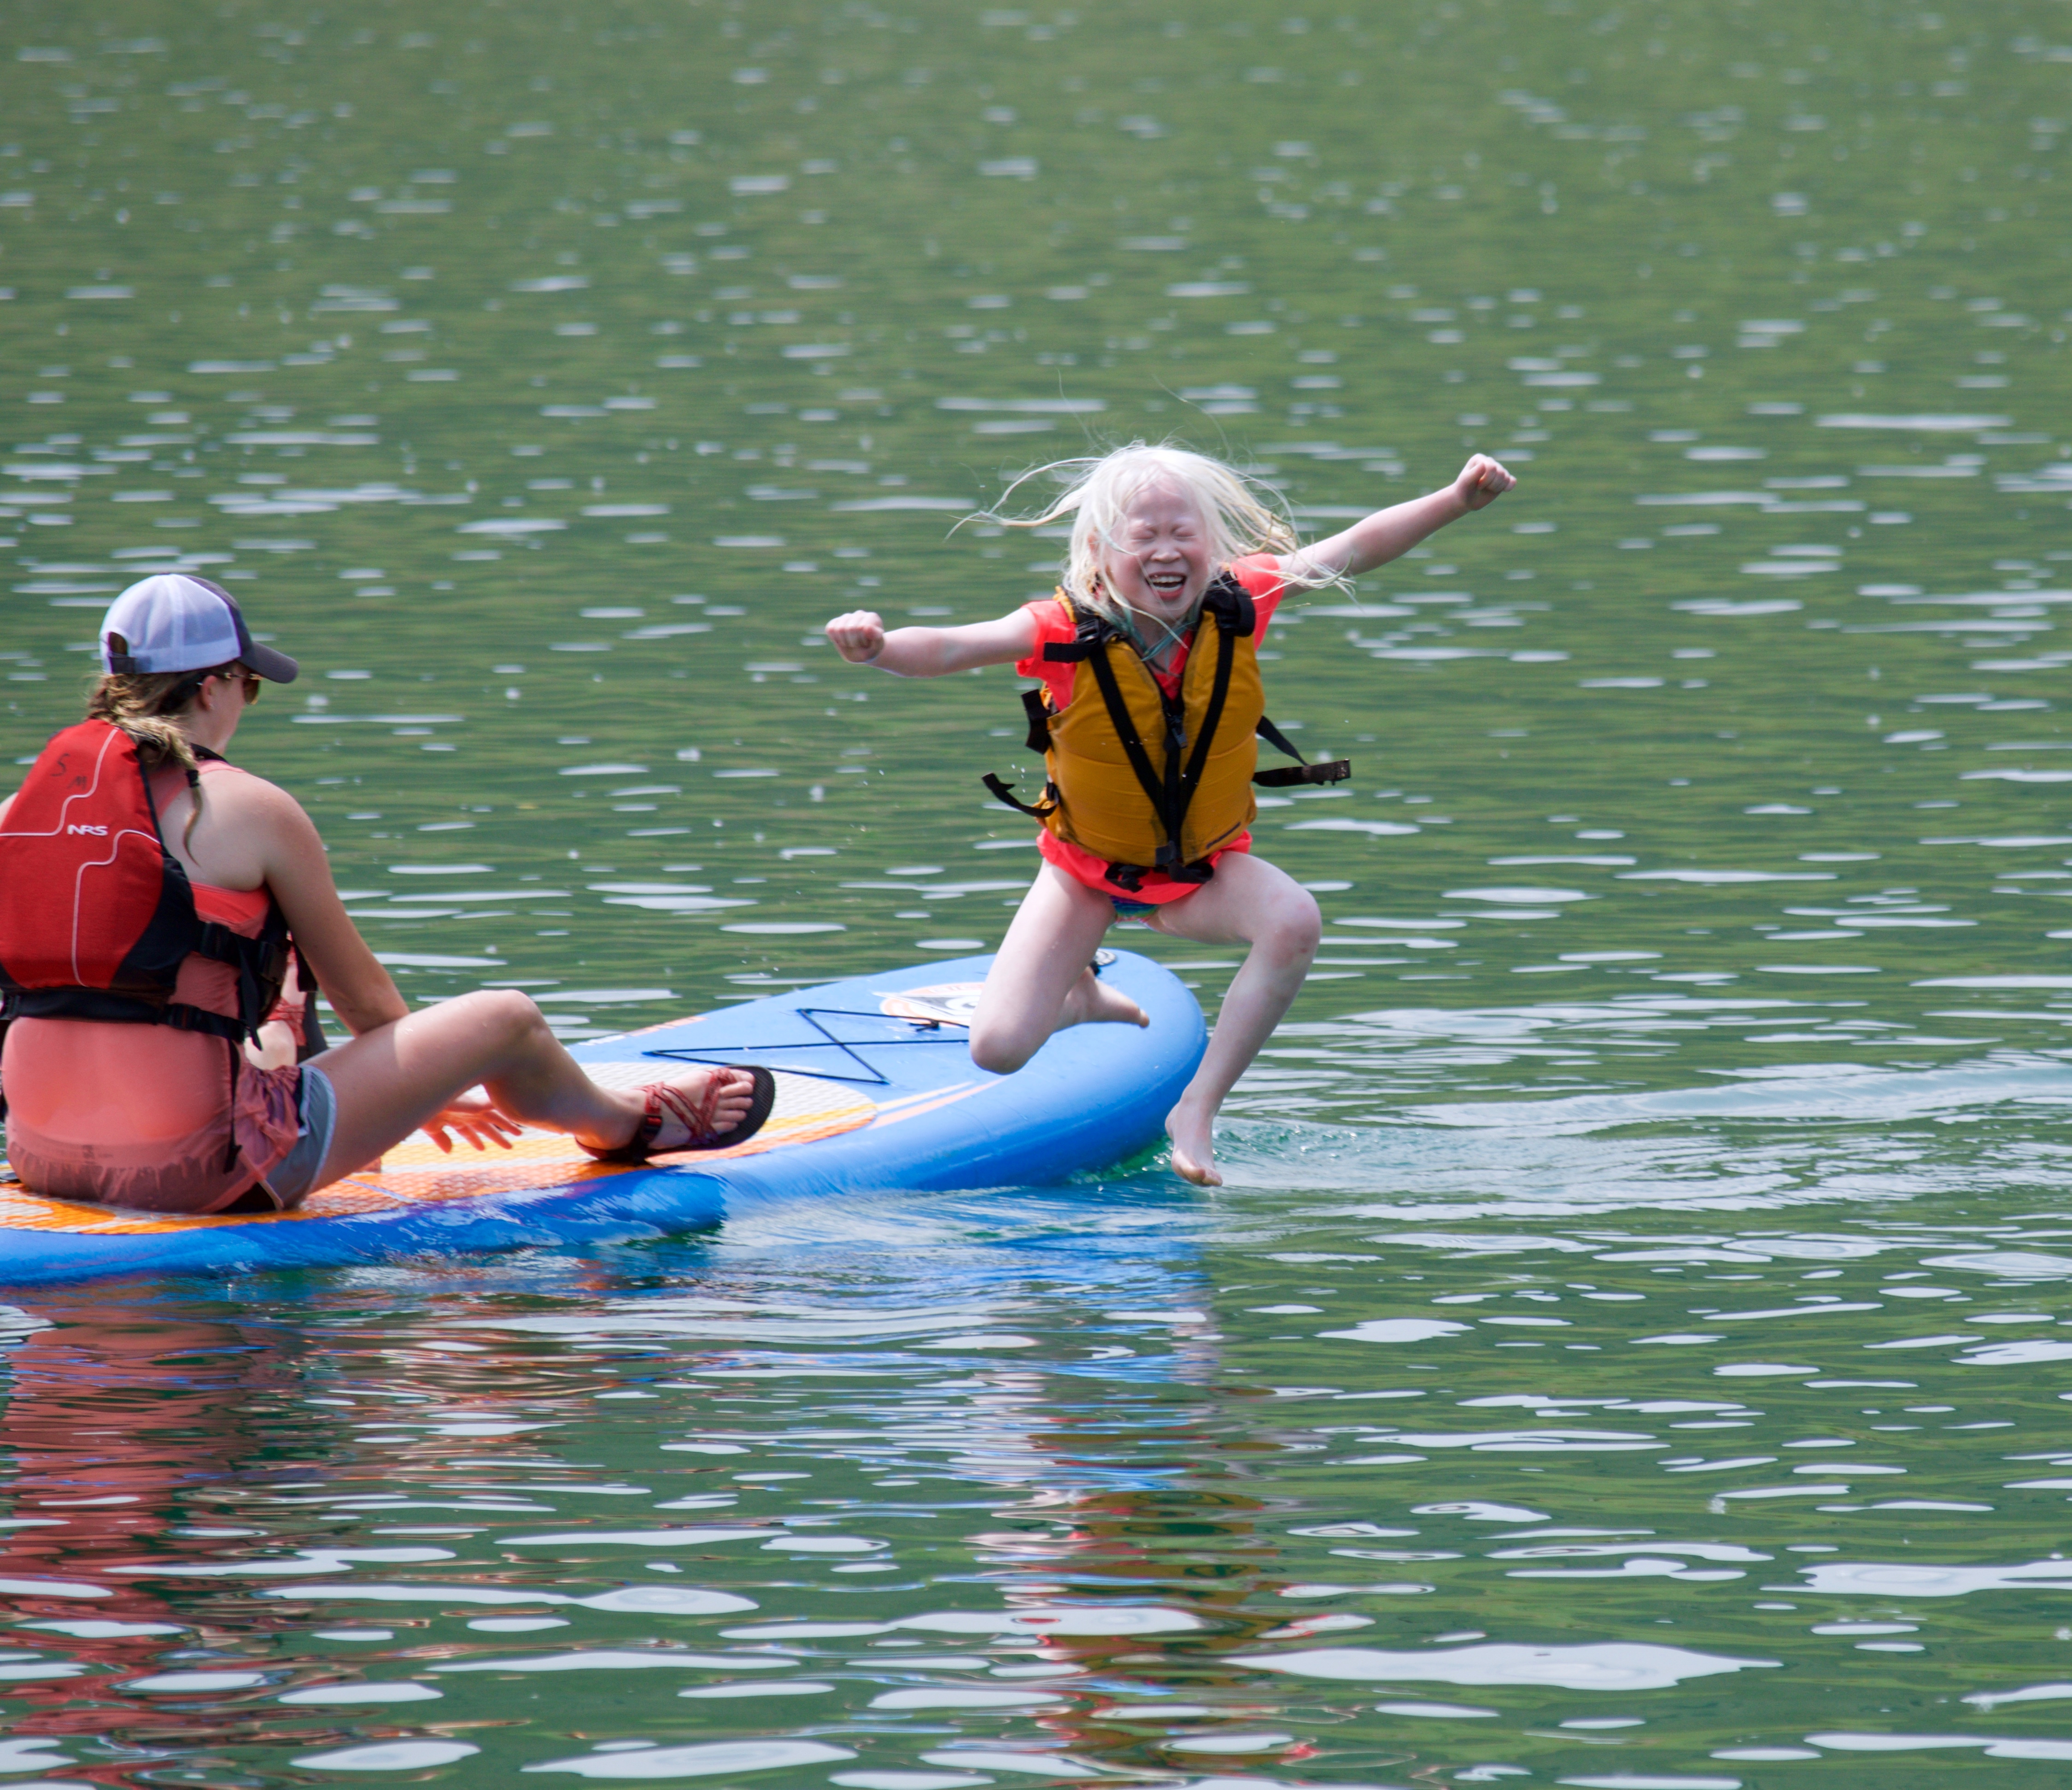 Cloe leaping from a paddle board during Confidence Camp